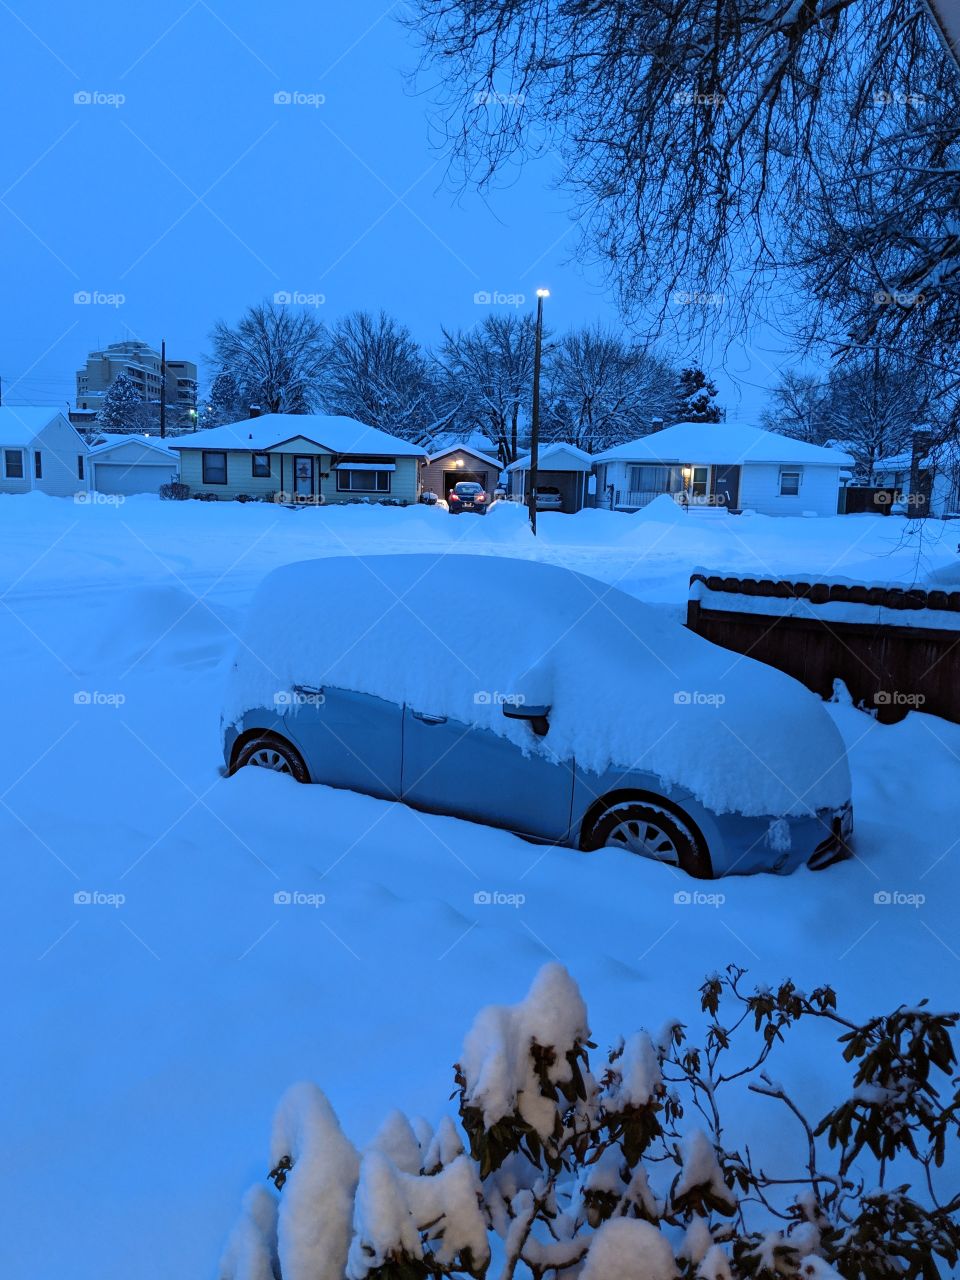 snow in the morning during snowmeggeddon 2019